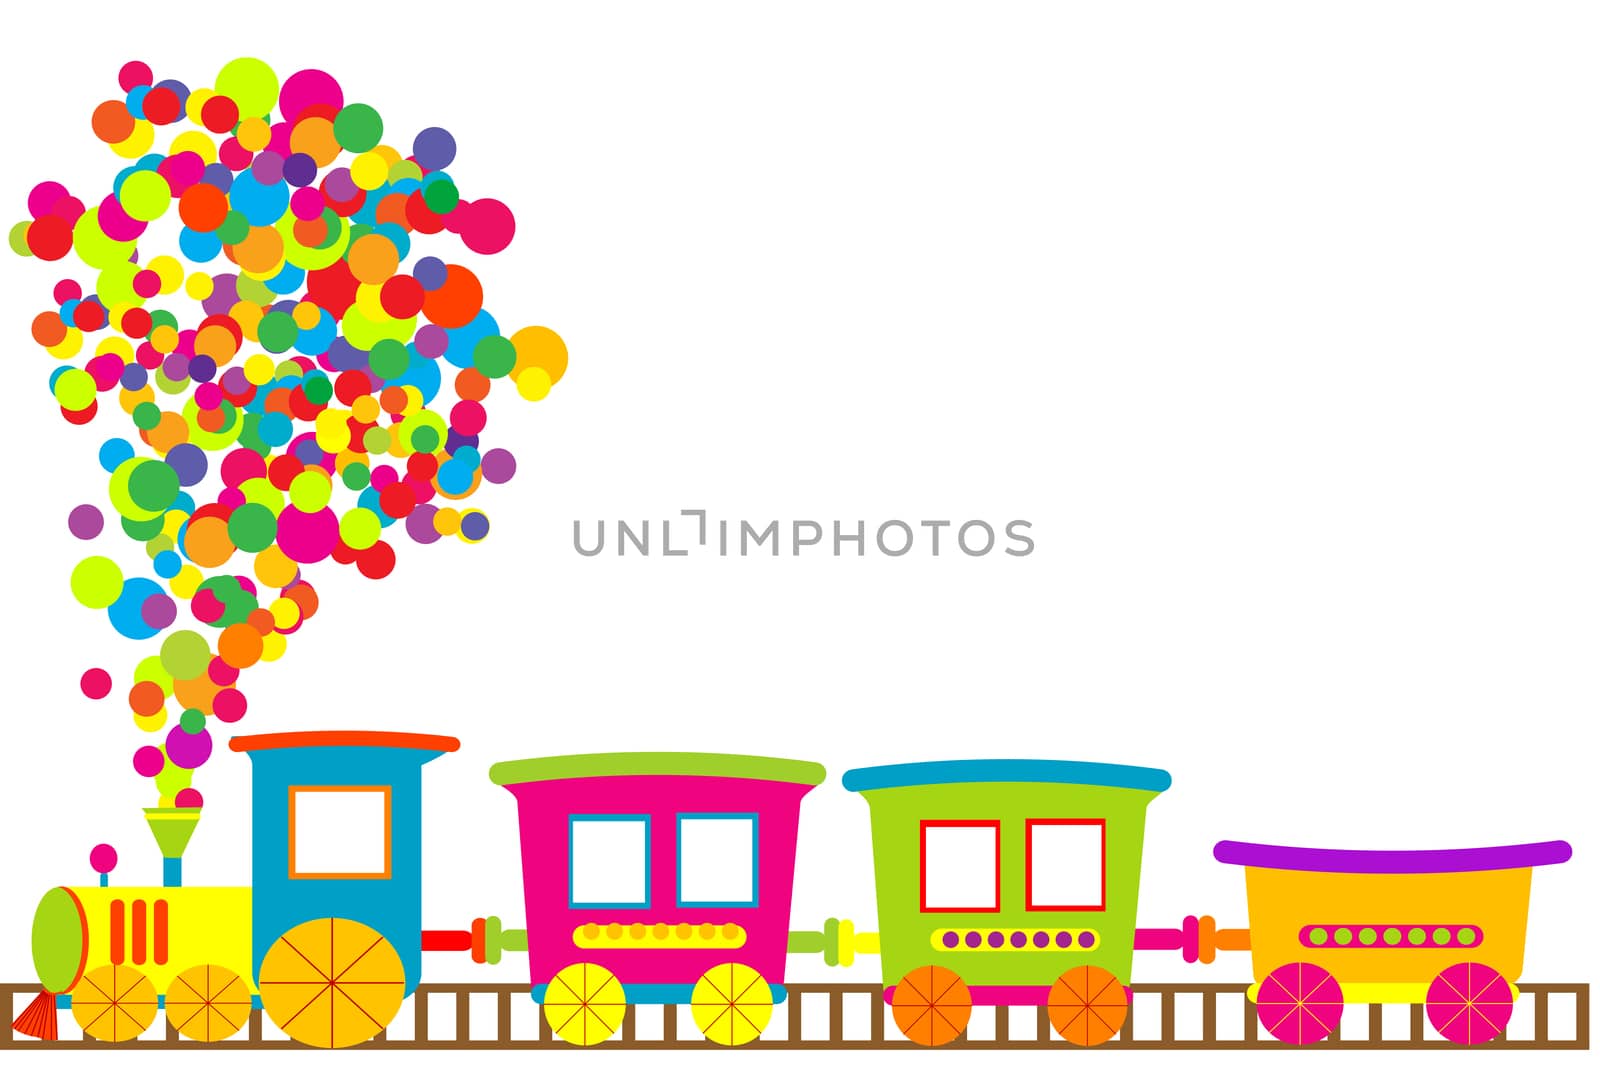 Colored toy train